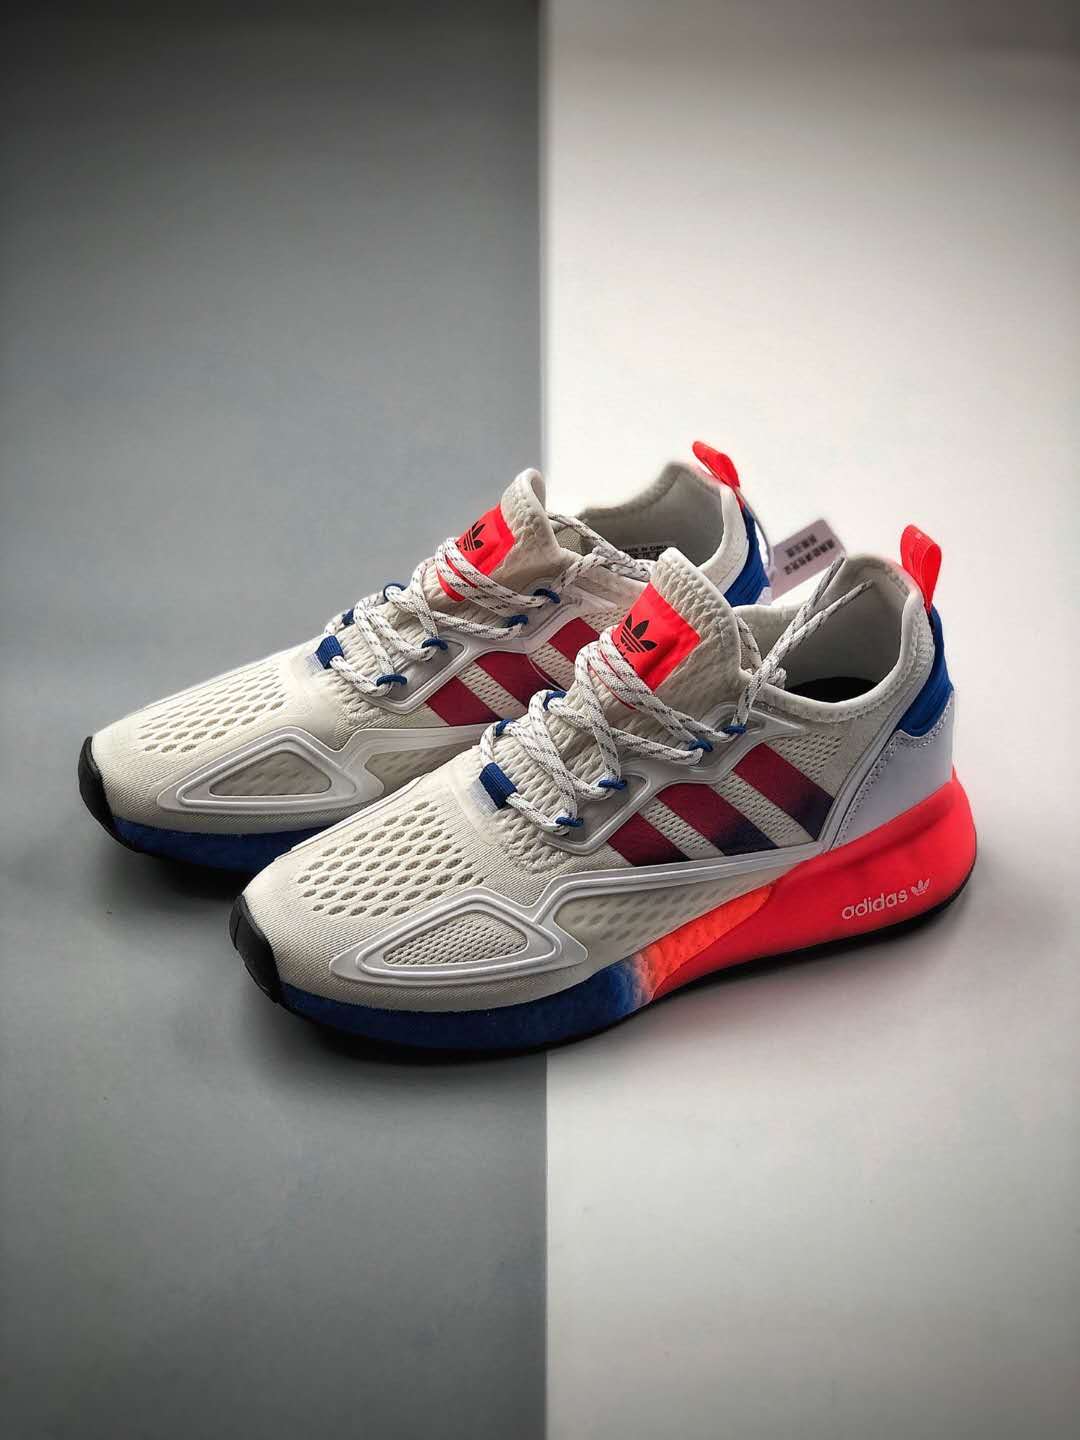 Adidas ZX 2K Boost FV9996 - Stylish and Comfortable Sneakers